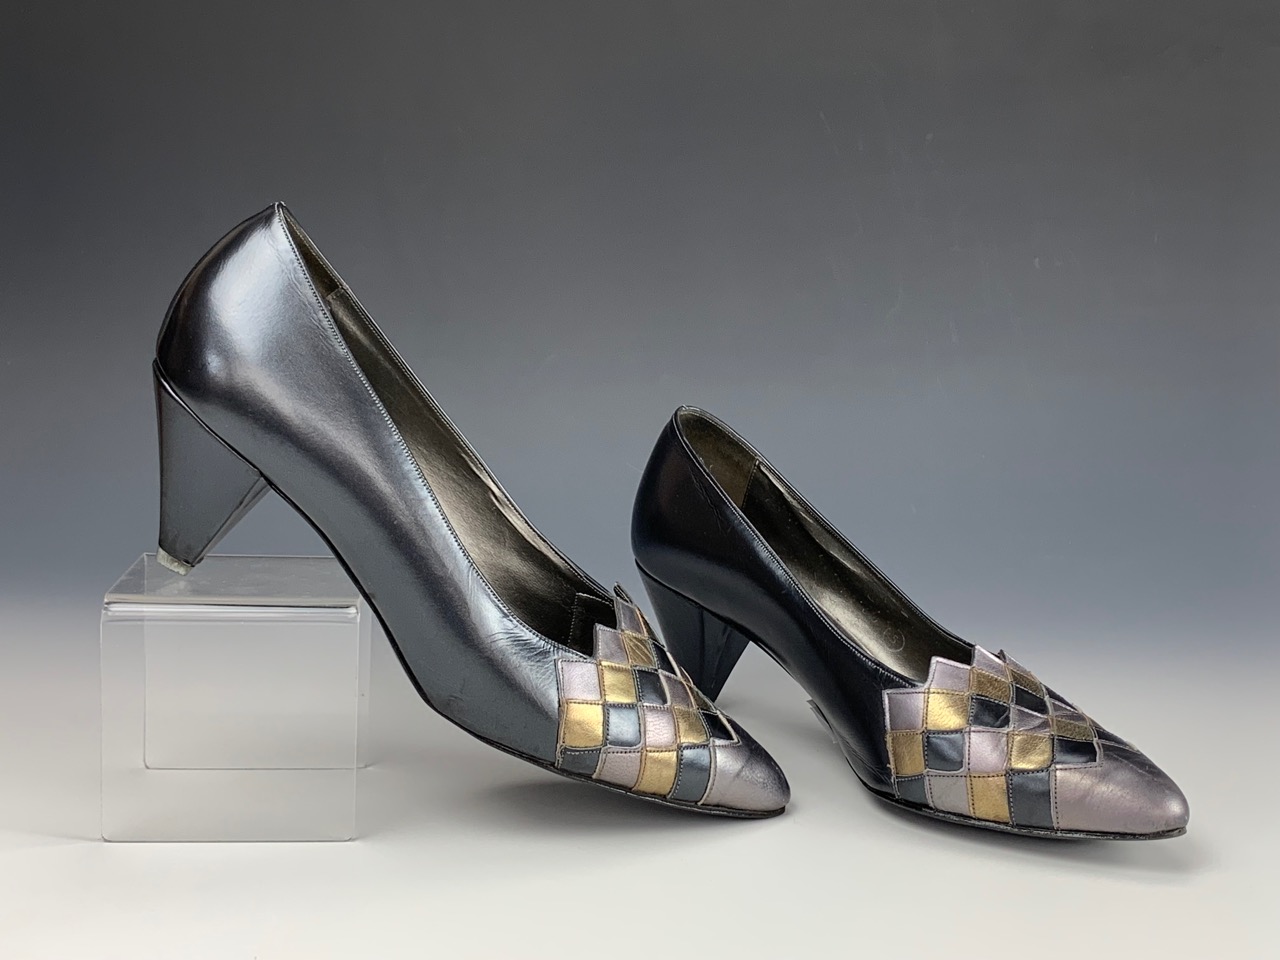 A 1980s pair of Mary Quant court shoes, in navy blue with a metallic diaper pattern toe, - Image 2 of 2